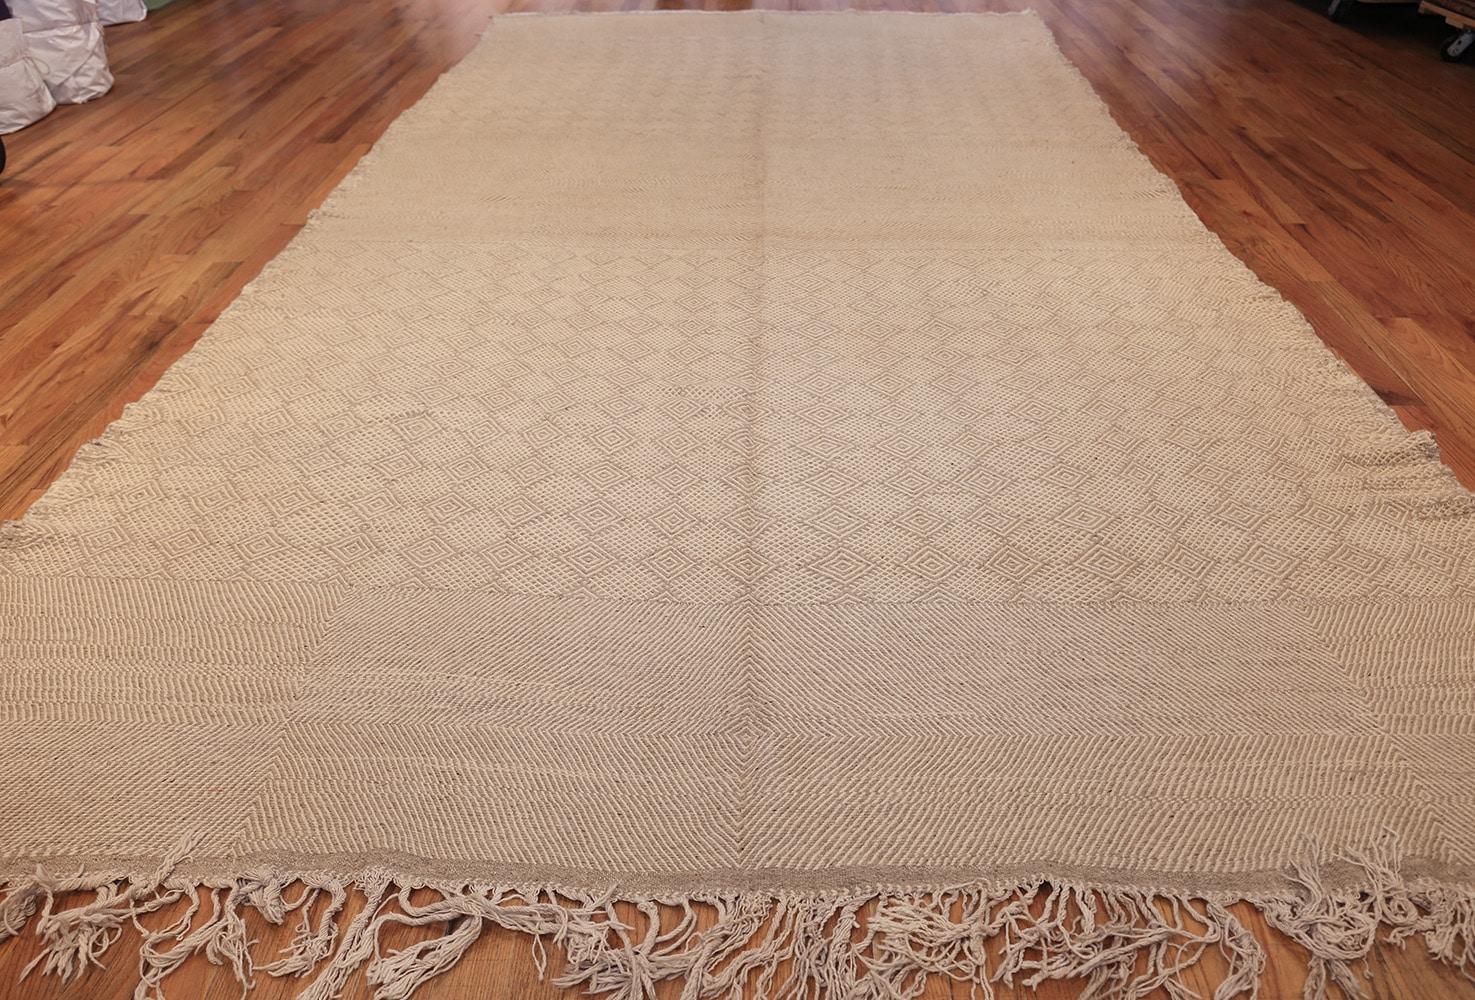 Vintage Moroccan rug, Origin: Morocco, circa mid-20th century – Size: 8 ft 3 in x 16 ft 4 in (2.51 m x 4.98 m)

Rendered in a charming selection of neutrals, this elegant vintage rug from Morocco depicts a variety of repeating motifs, including